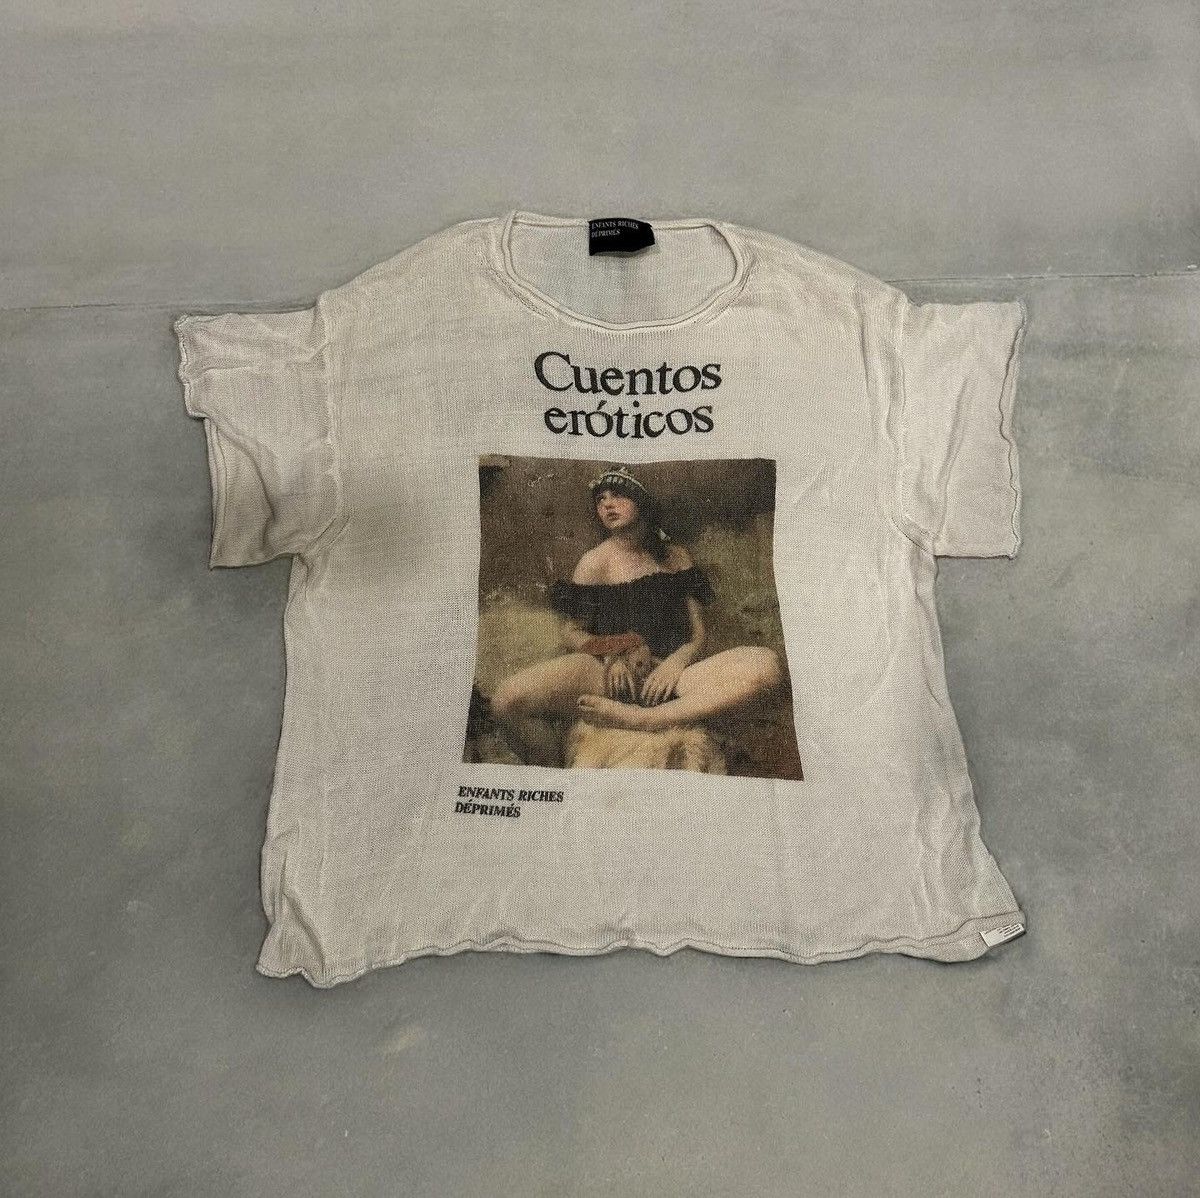 Pre-owned Enfants Riches Deprimes Cuentos Eroticos Tee In White